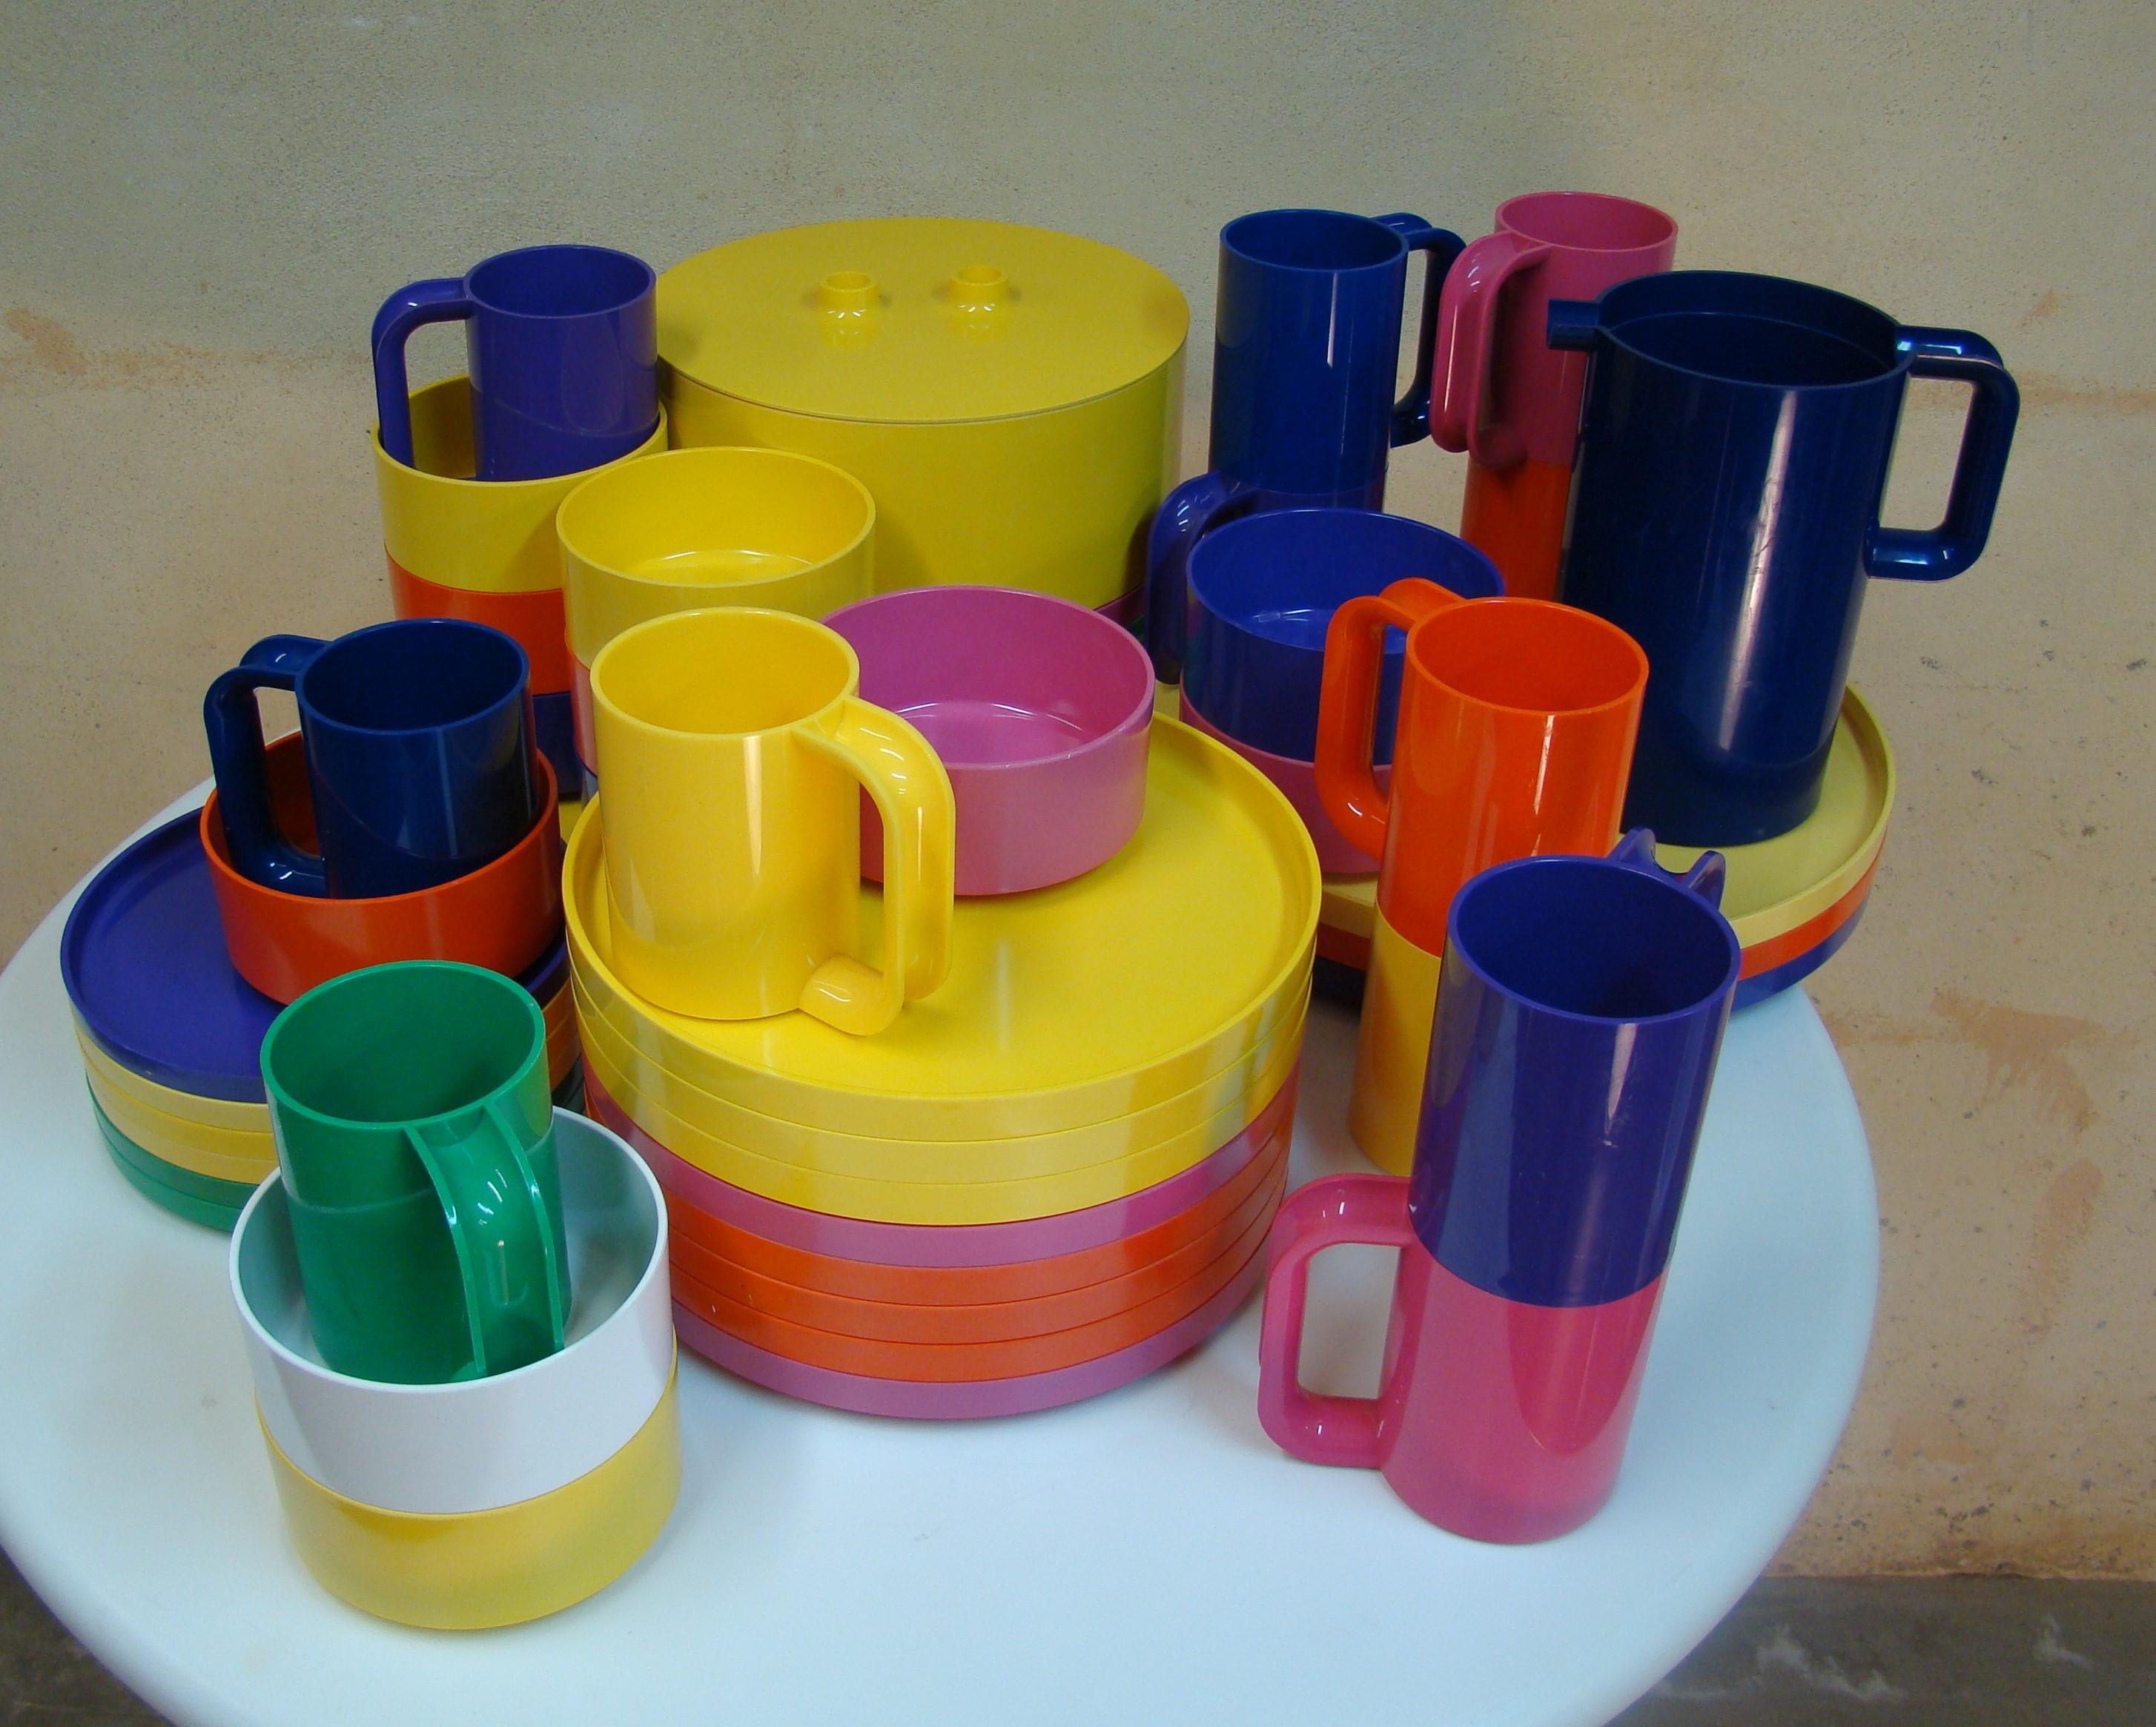 Mid-20th Century Colorful Assortment of Dinnerware by Massimo Vignelli for Heller Design